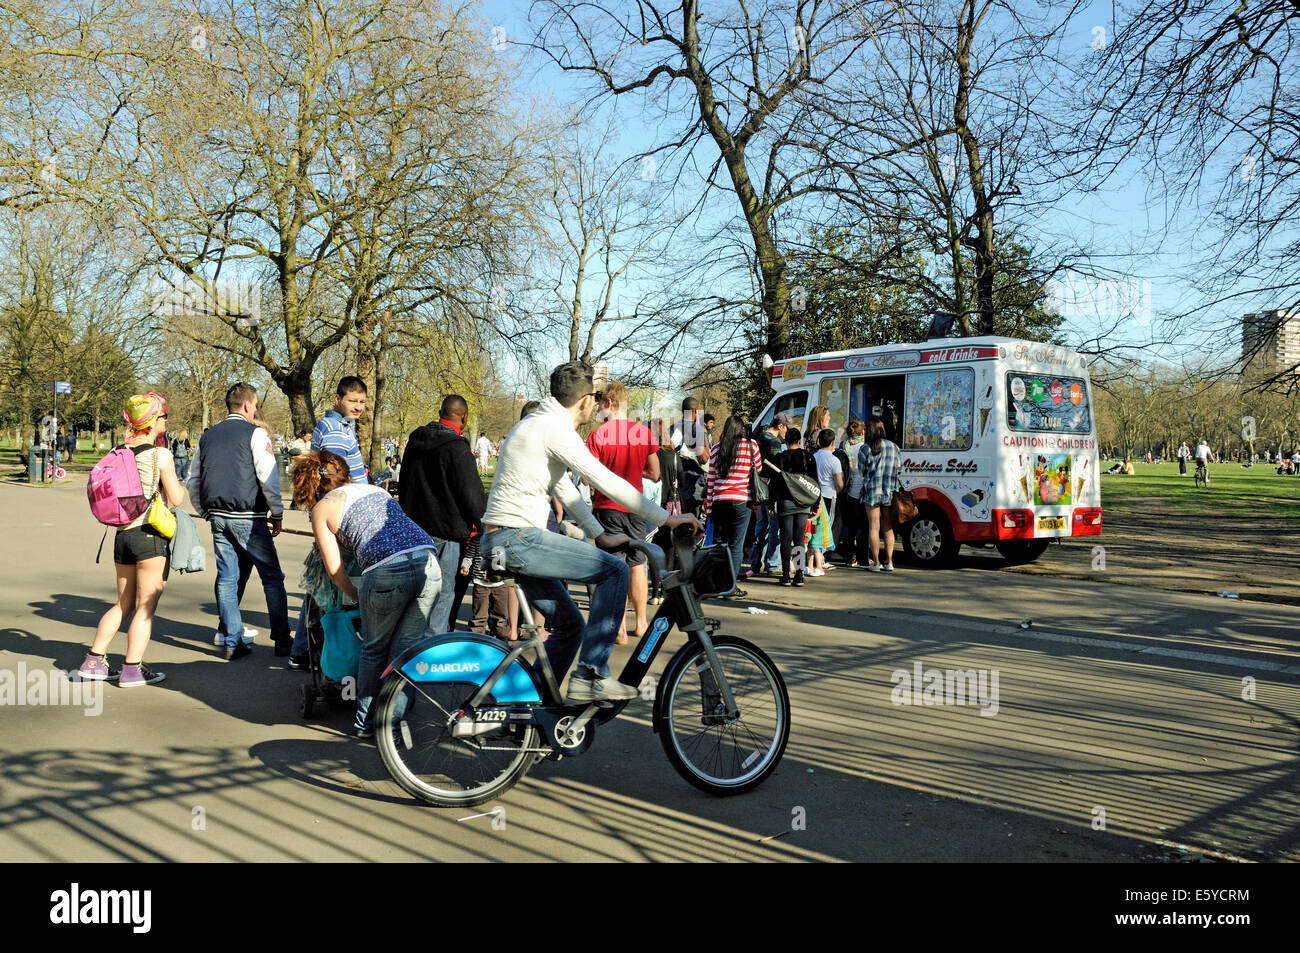 Queue at ice cream van with passing cyclist on Barclays bike, Victoria Park, London Borough of Tower Hamlets, England Britain UK Stock Photo